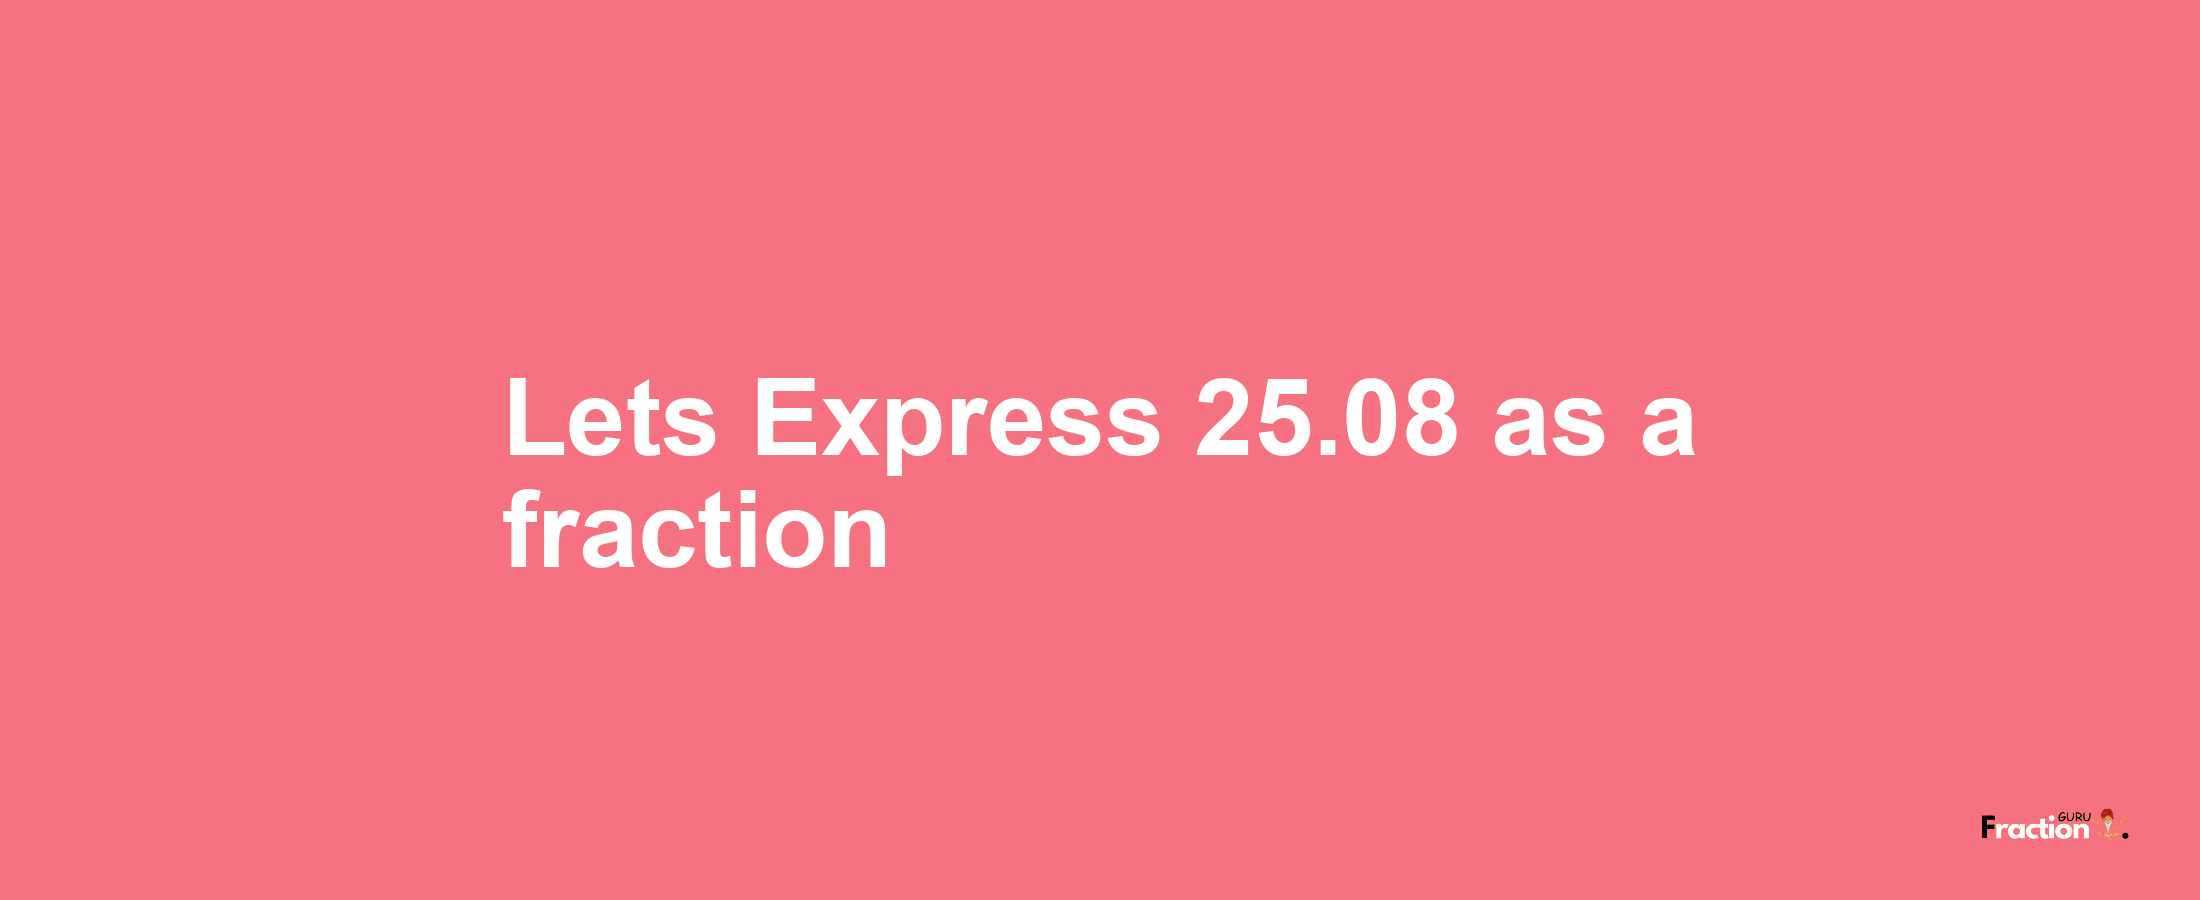 Lets Express 25.08 as afraction